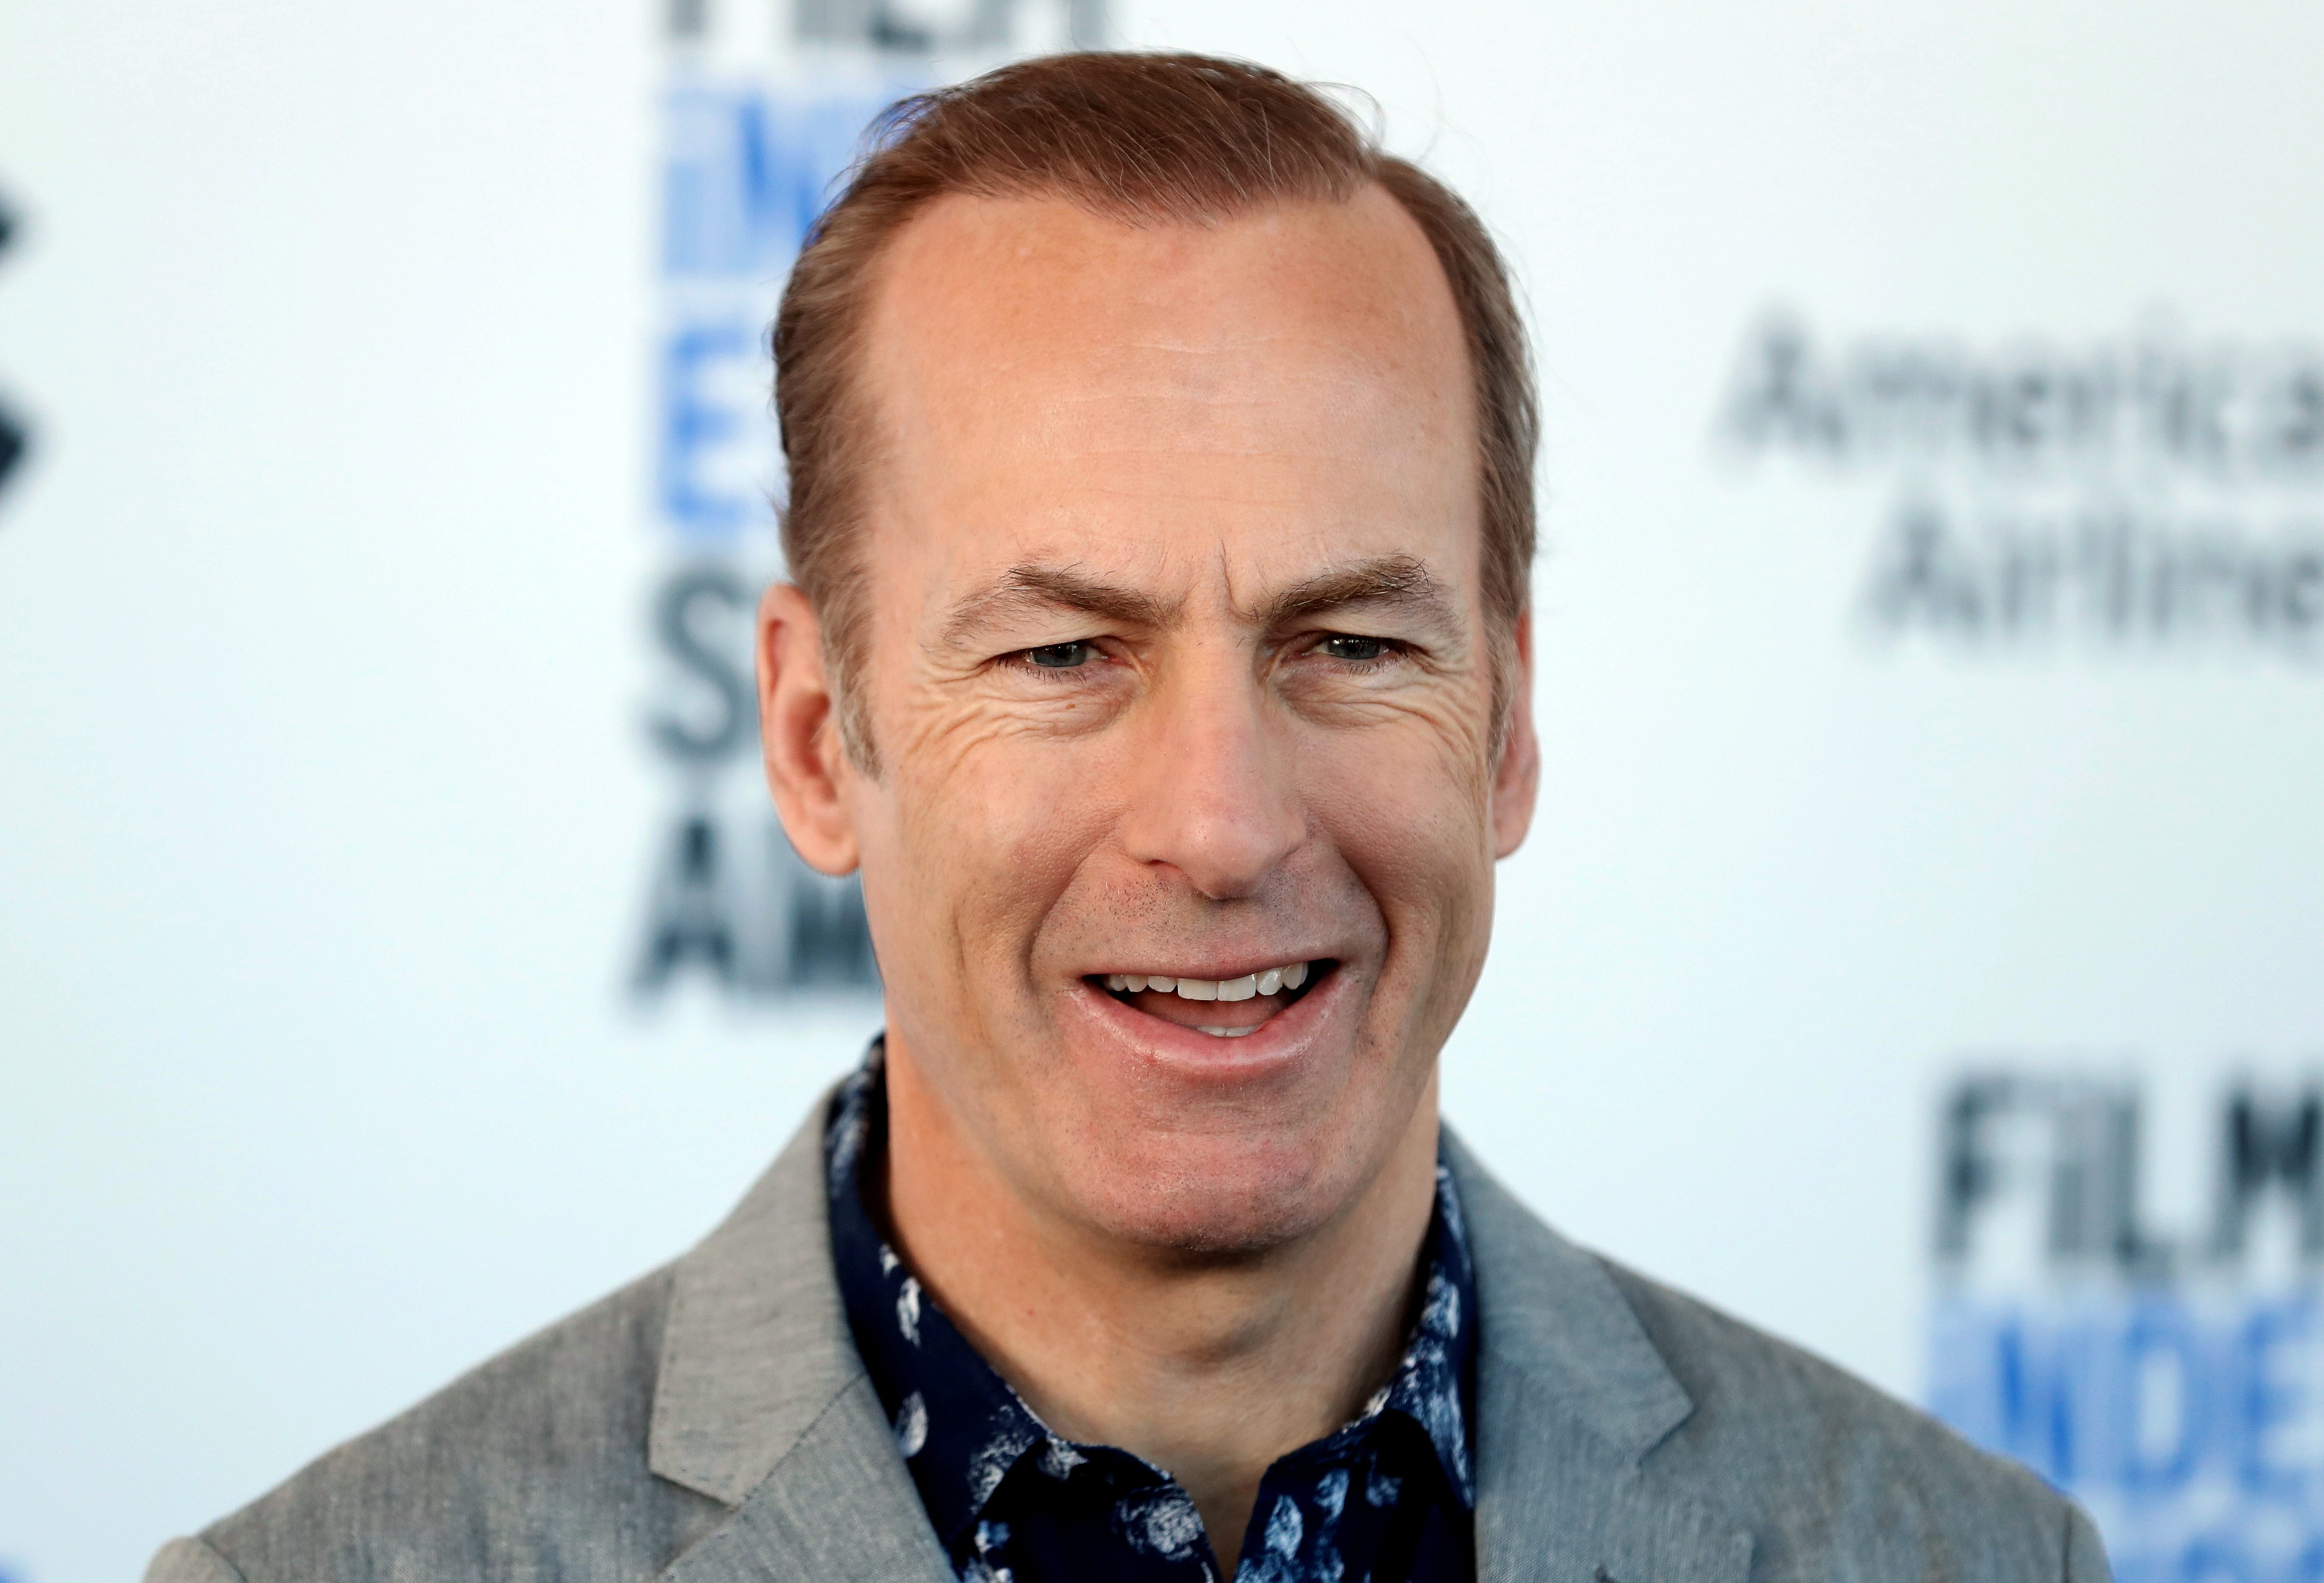 ‘Better Call Saul’ star Bob Odenkirk hospitalized after ‘heart-related incident’